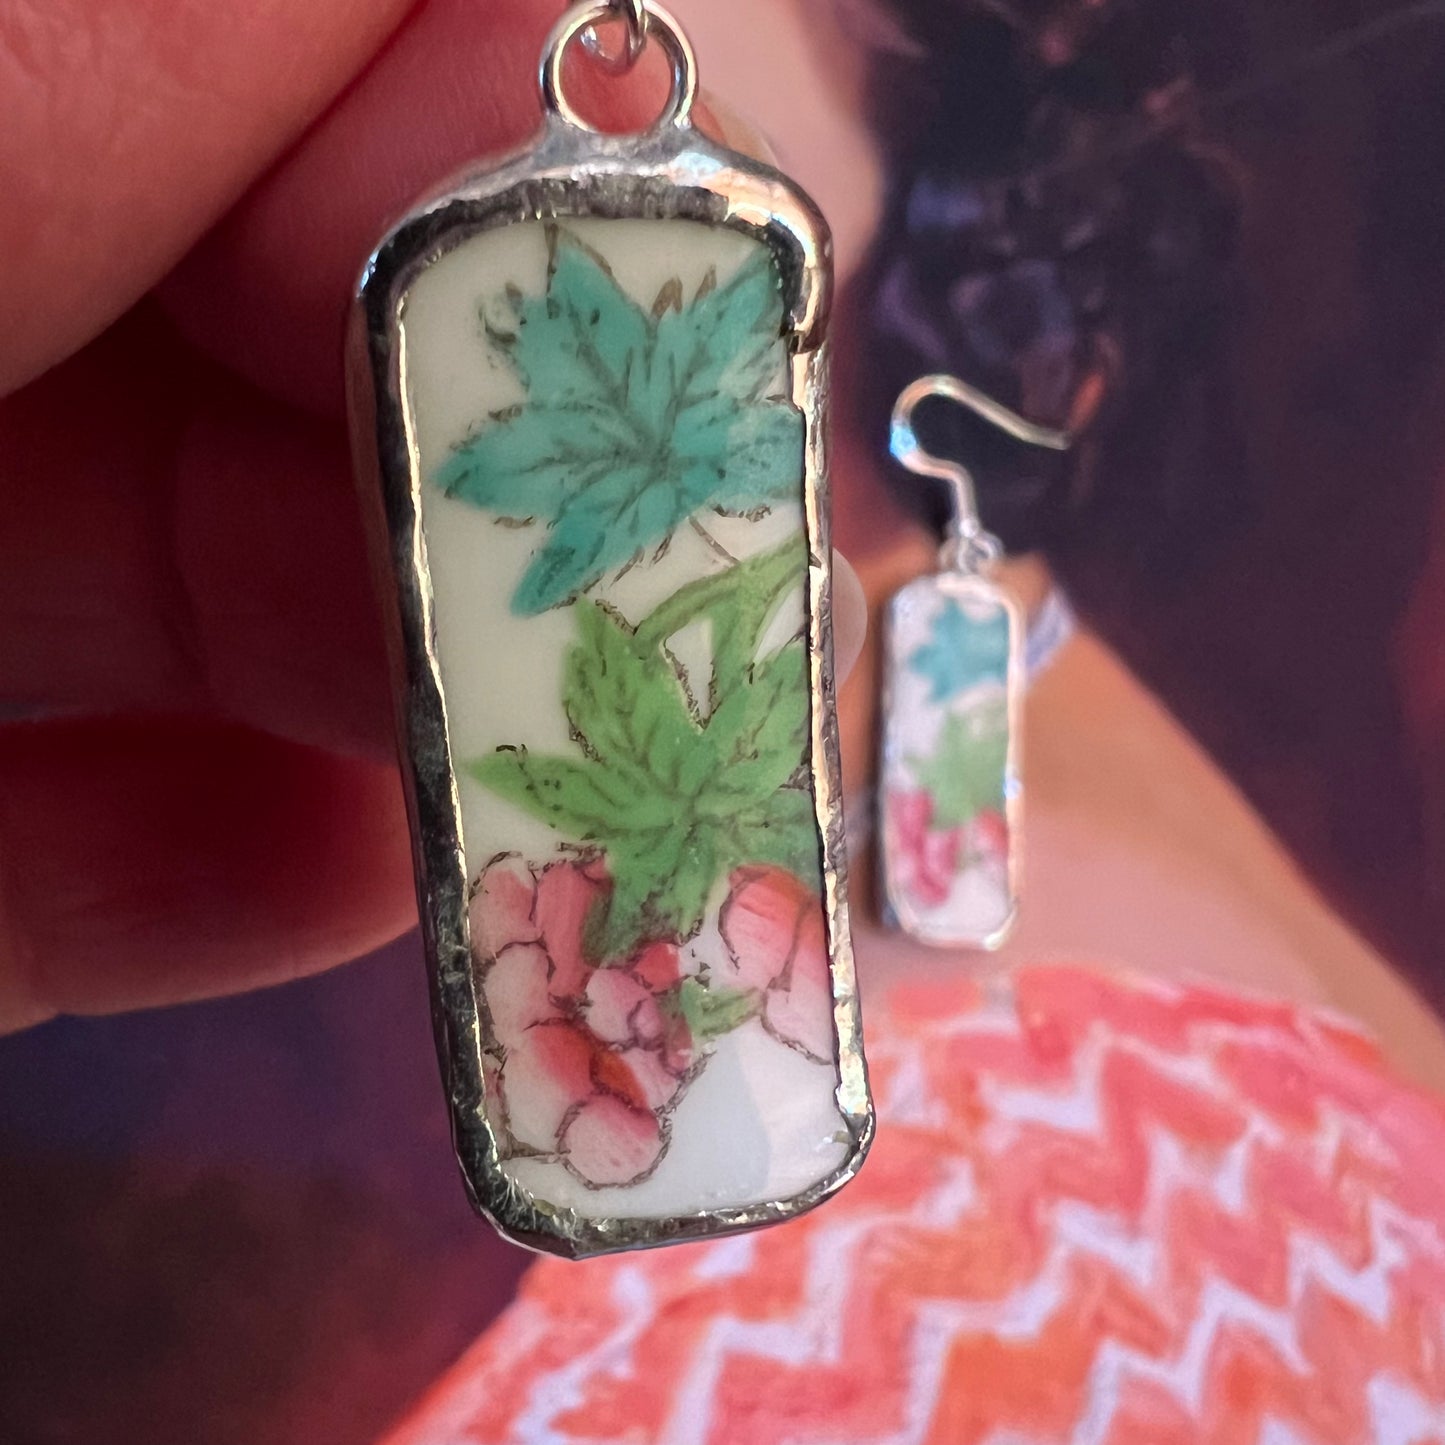 Vintage China Earrings Blooms & Leaves by Midwinter